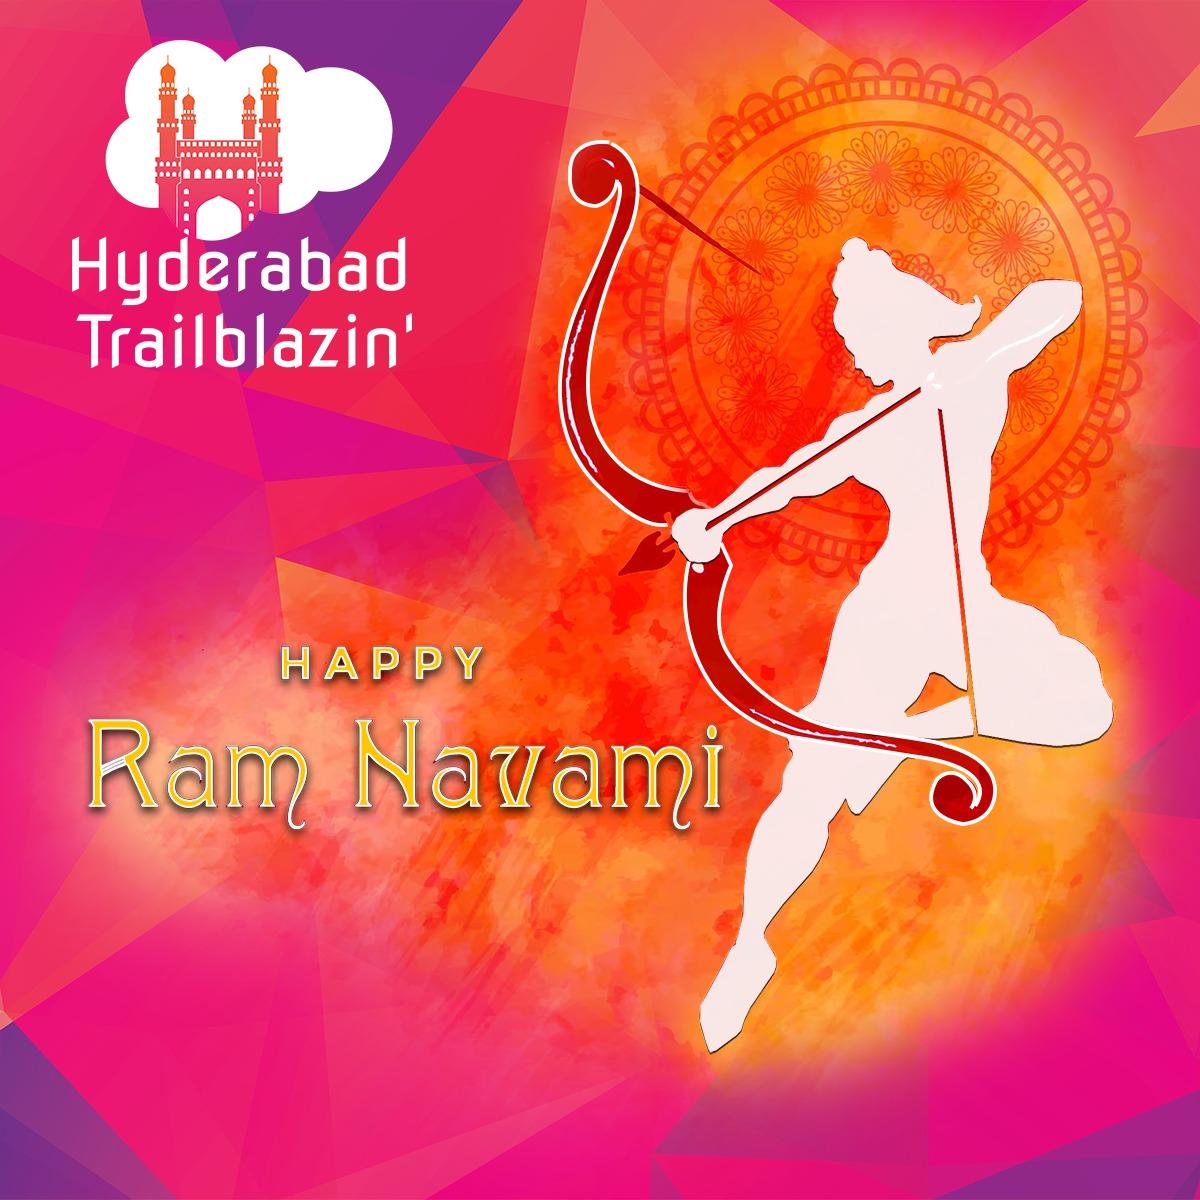 We are celebrating today Lord Rama's birth, symbolizing 'the light within us' 🌟, illuminating our hearts with courage and compassion.🫶🏻🫂 Team #HydTrailblazin wishes you a Happy Ram Navami which brings you Love, Peace, and Resilience to conquer Challenges like Lord Rama! 🙏🏻